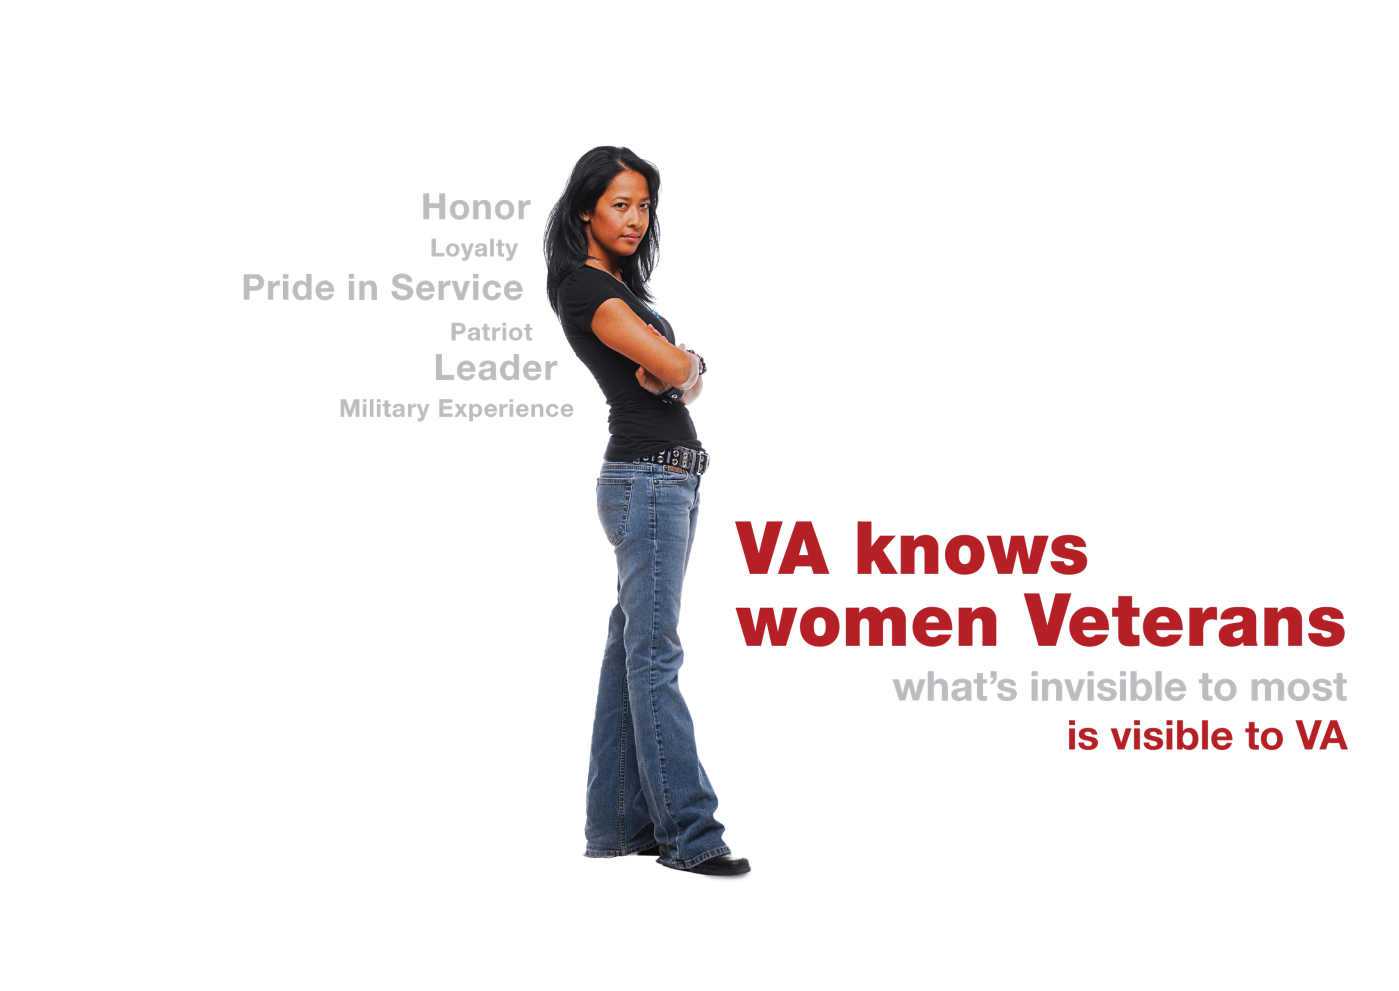 VA knows women veterans what's invisible to most is visible to VA